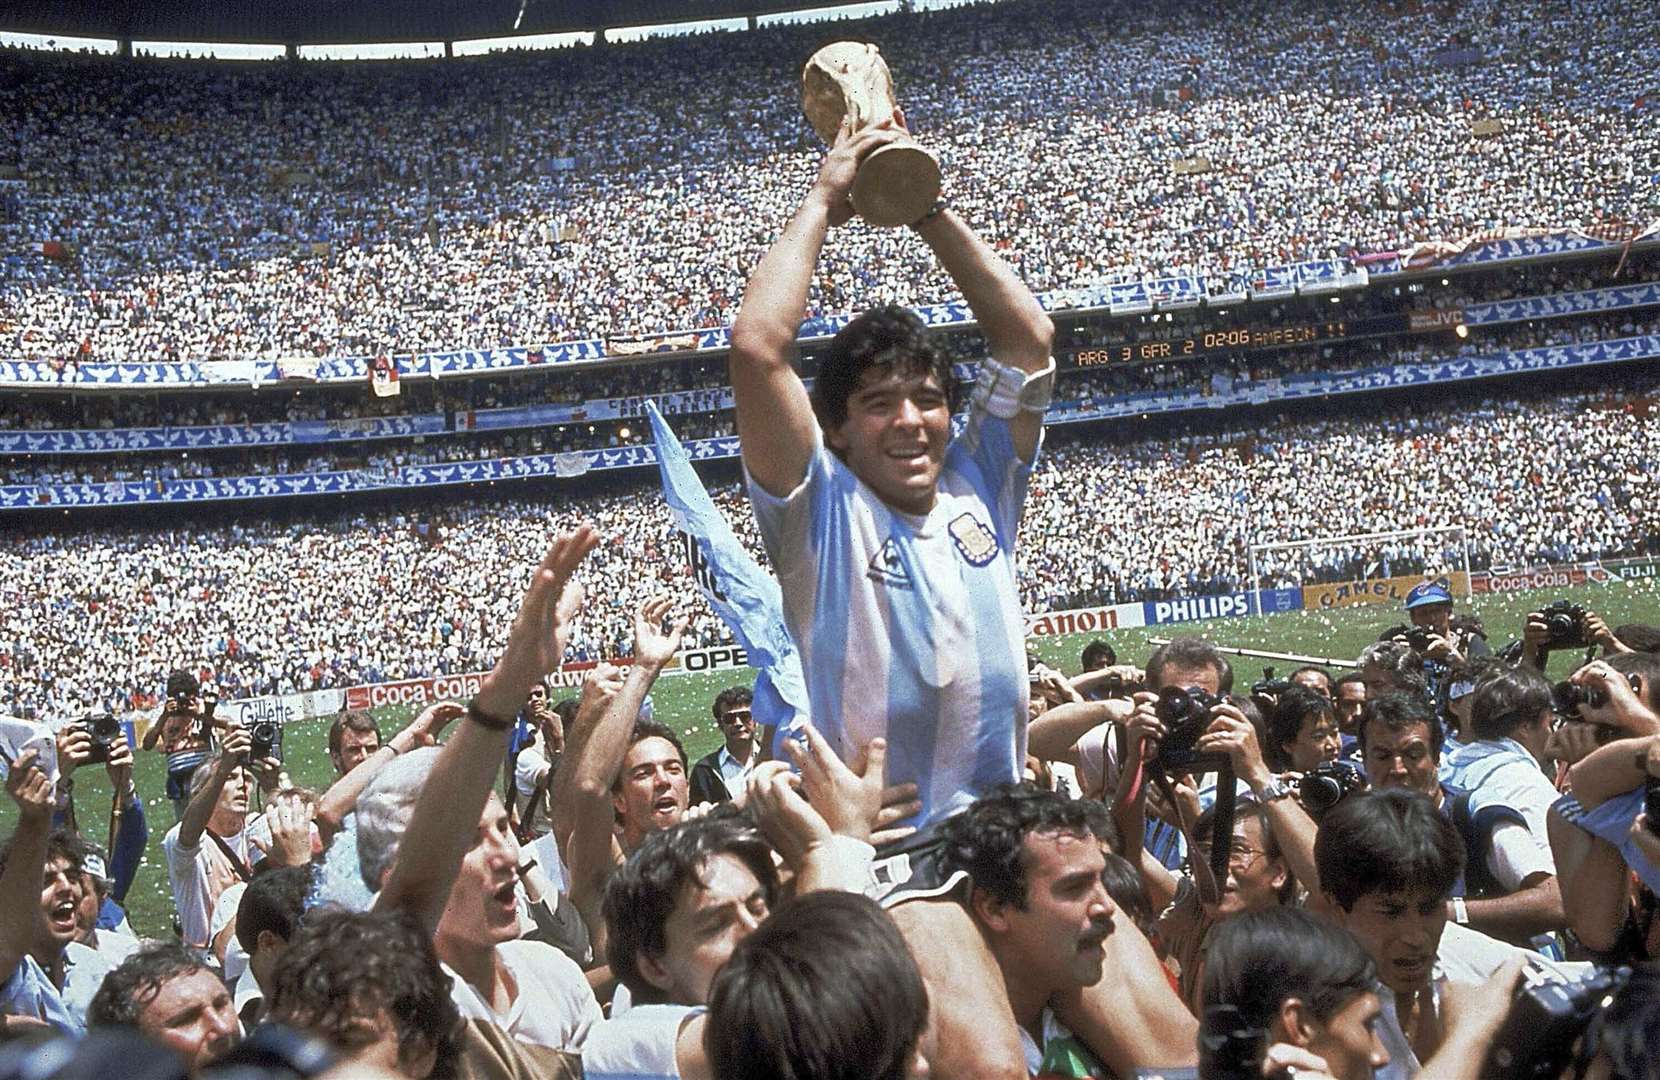 Diego Maradona holds up his team's trophy after Argentina's 3-2 victory over West Germany at the World Cup final In Mexico City Picture: AP Photo/Carlo Fumagalli, File